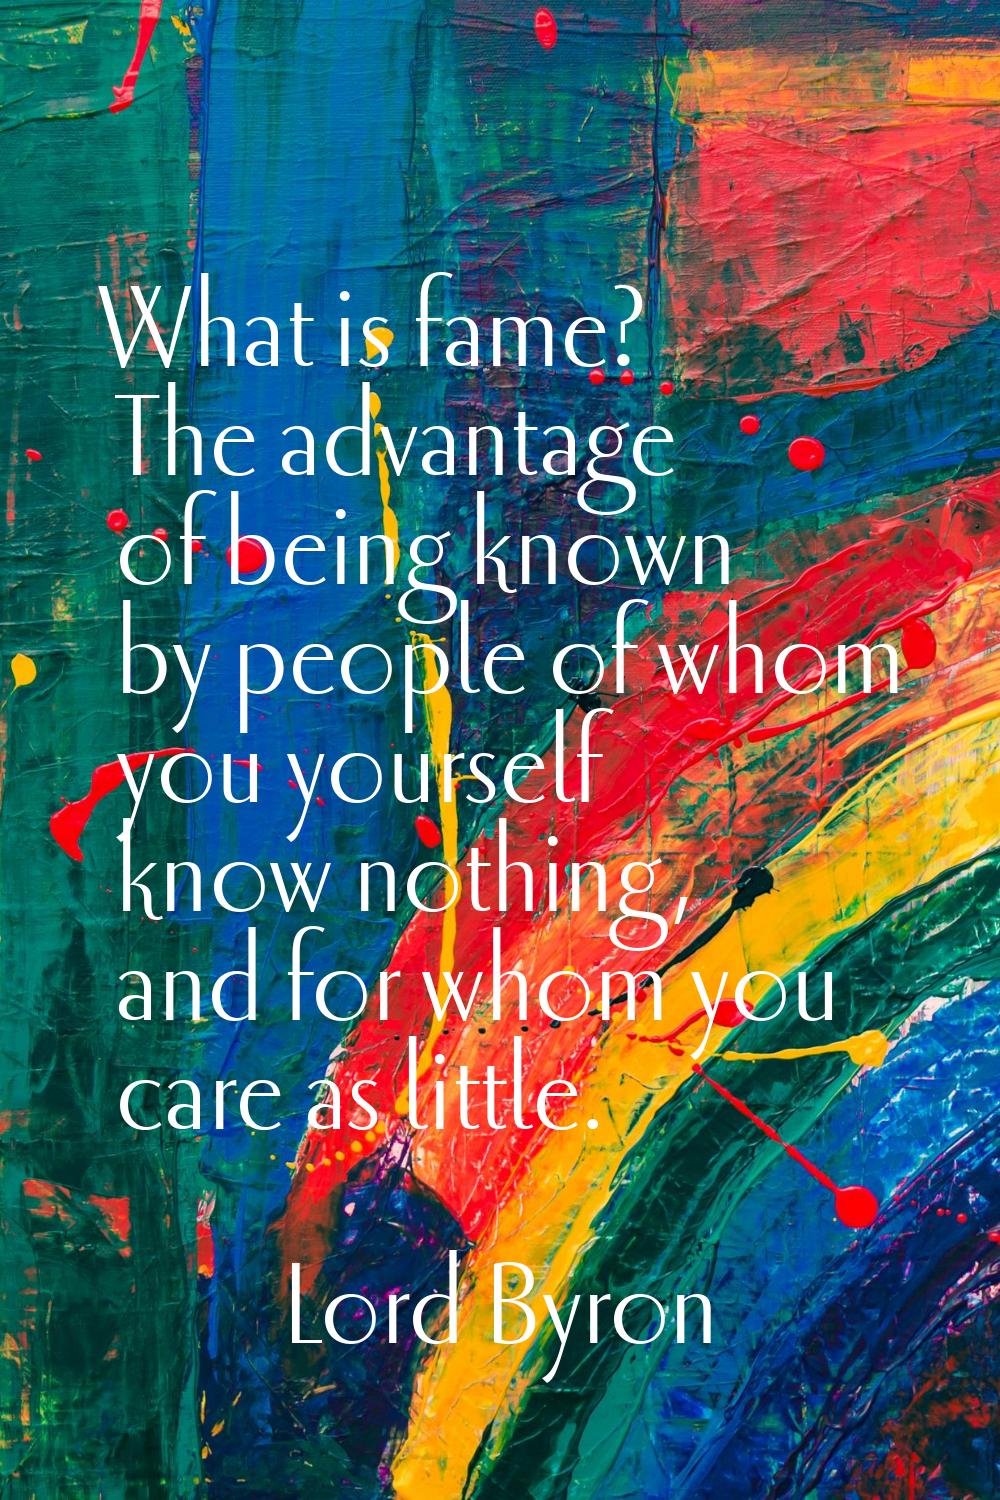 What is fame? The advantage of being known by people of whom you yourself know nothing, and for who